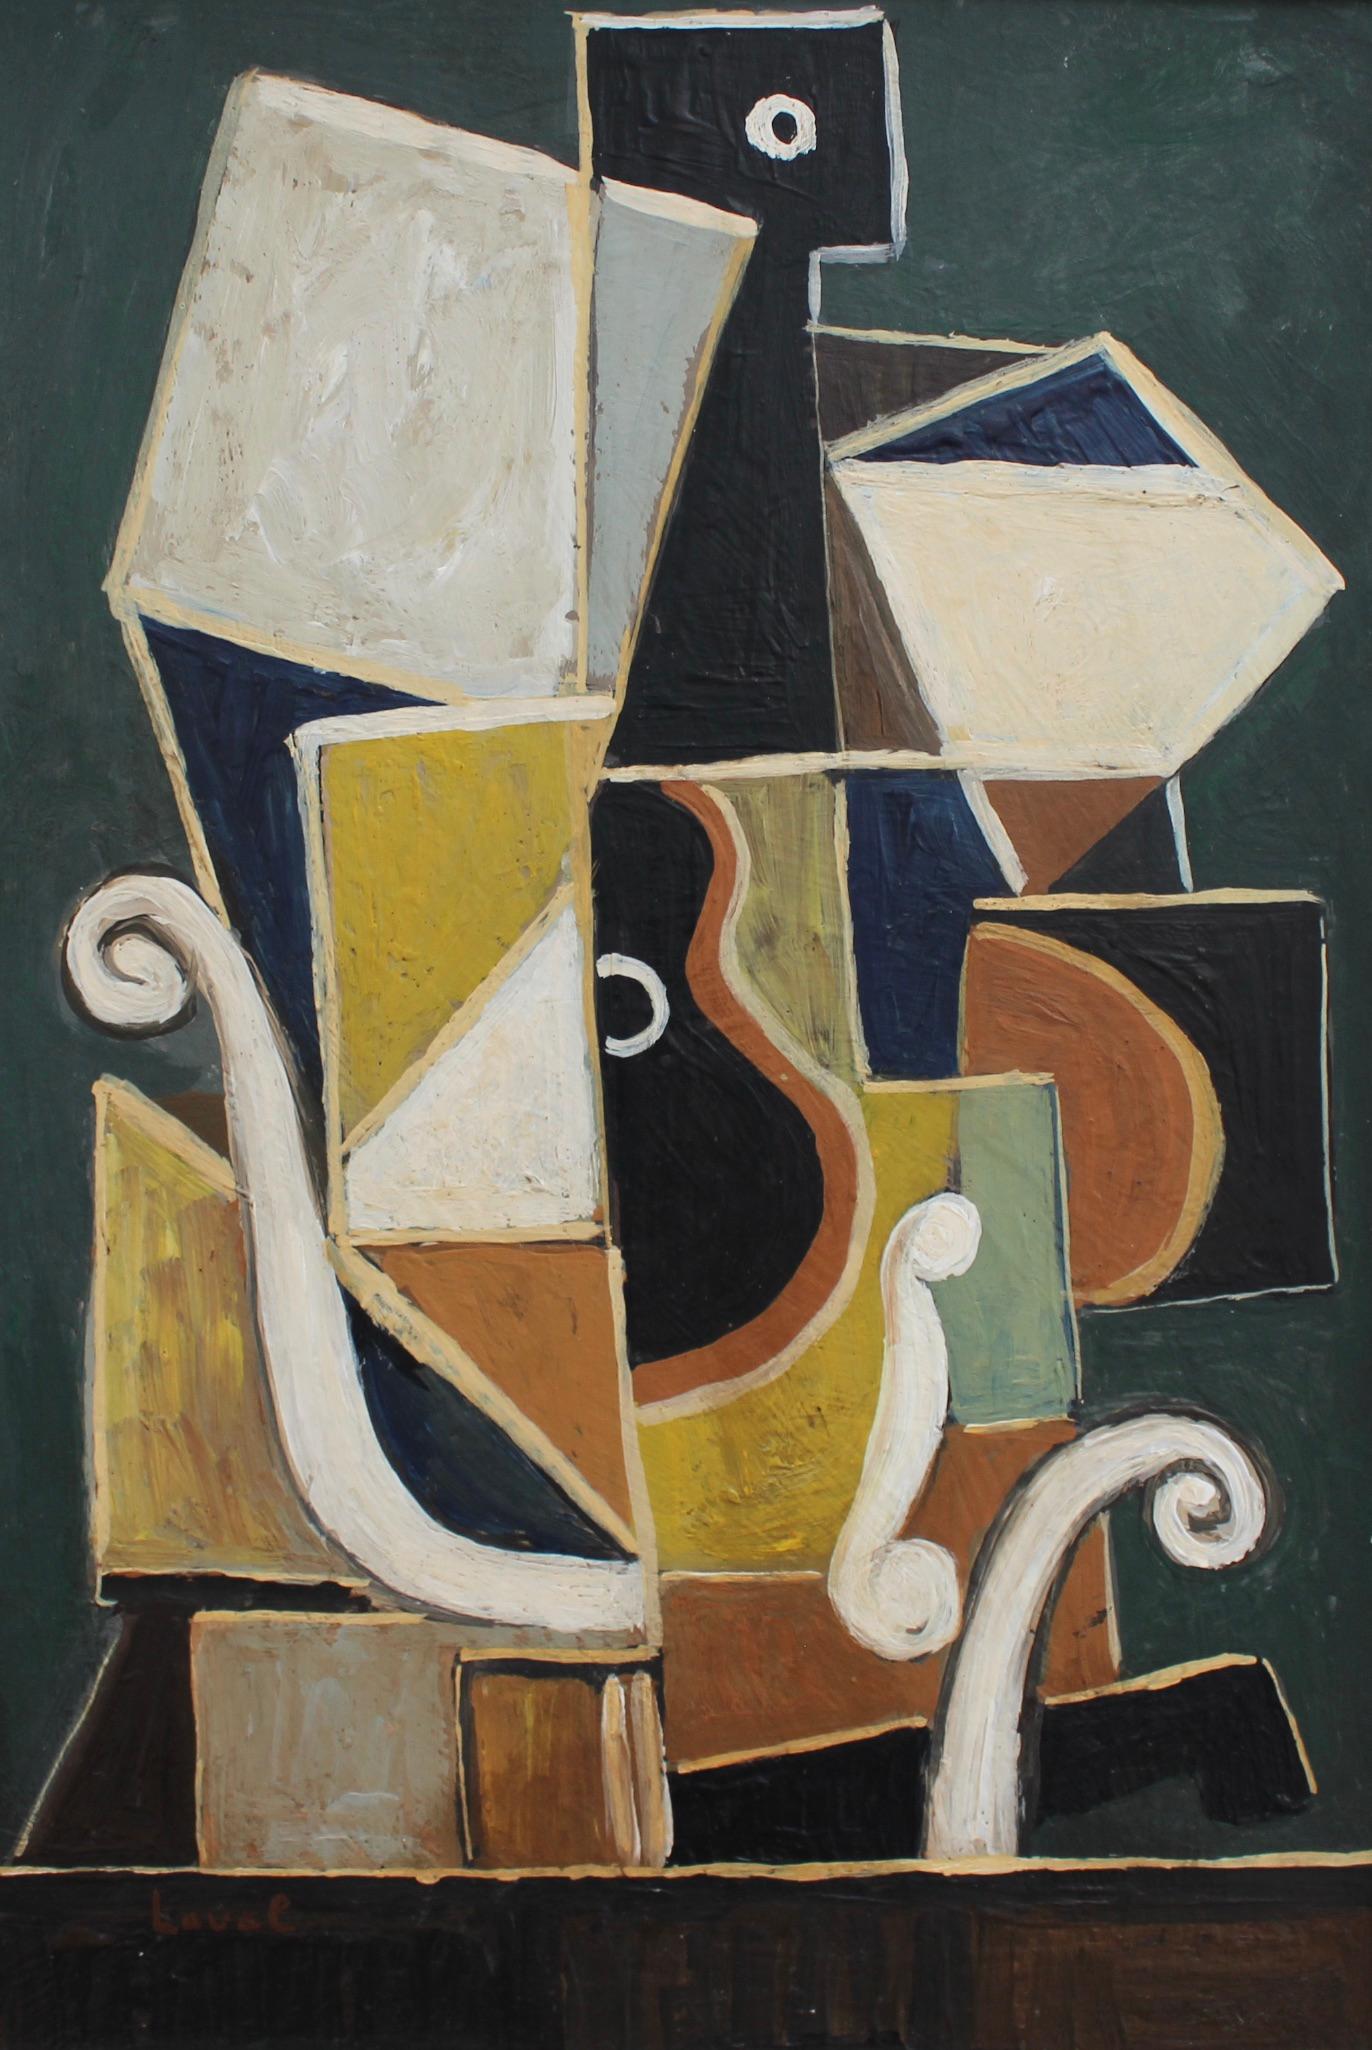 Unknown Still-Life Painting - 'Cubist Still Life with Guitar', Berlin School (circa 1970s)